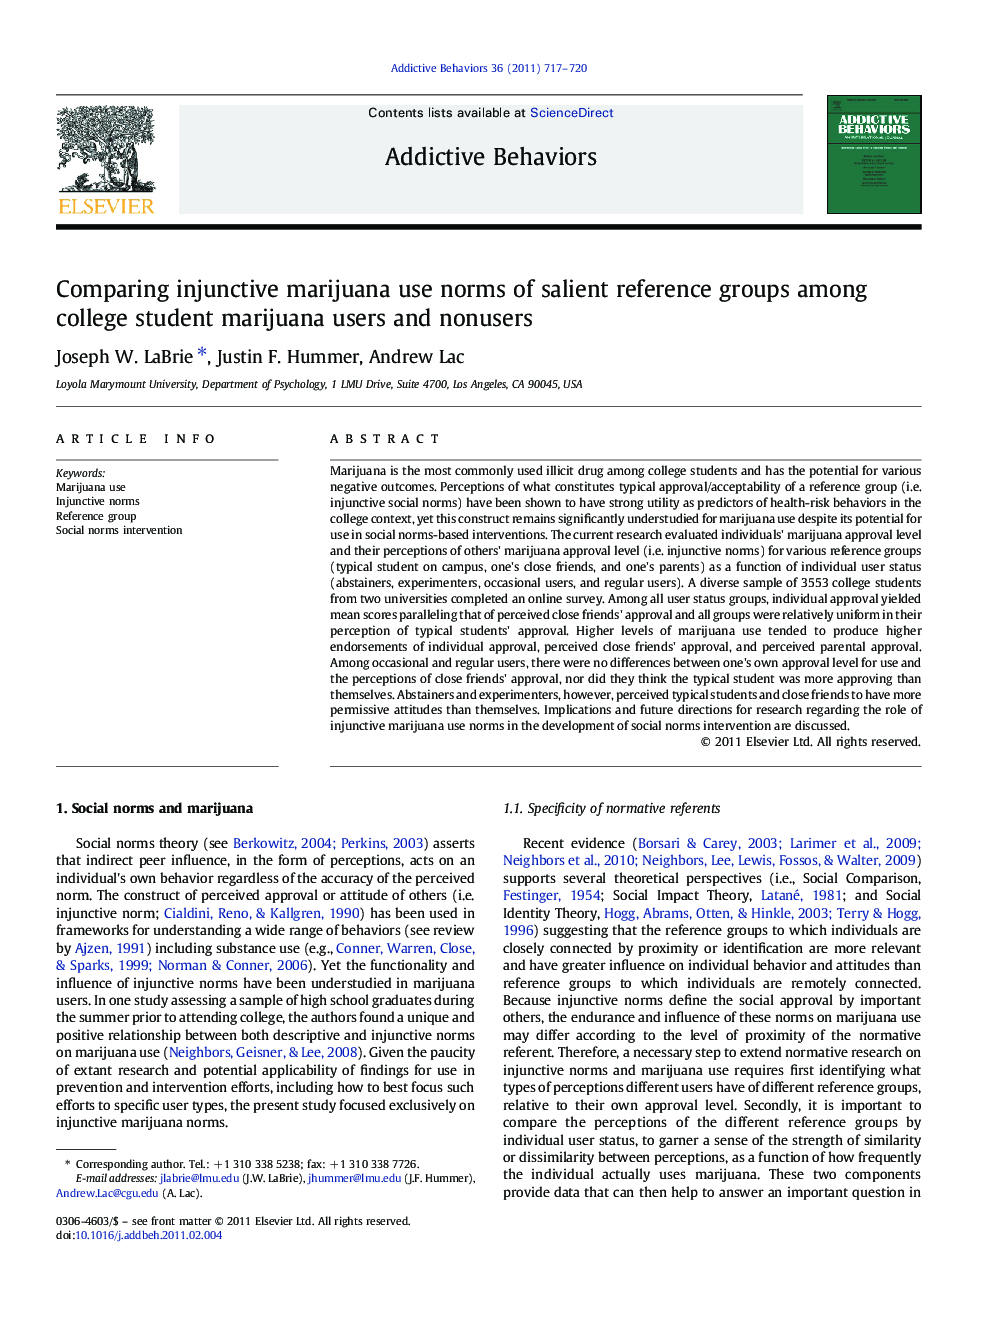 Comparing injunctive marijuana use norms of salient reference groups among college student marijuana users and nonusers